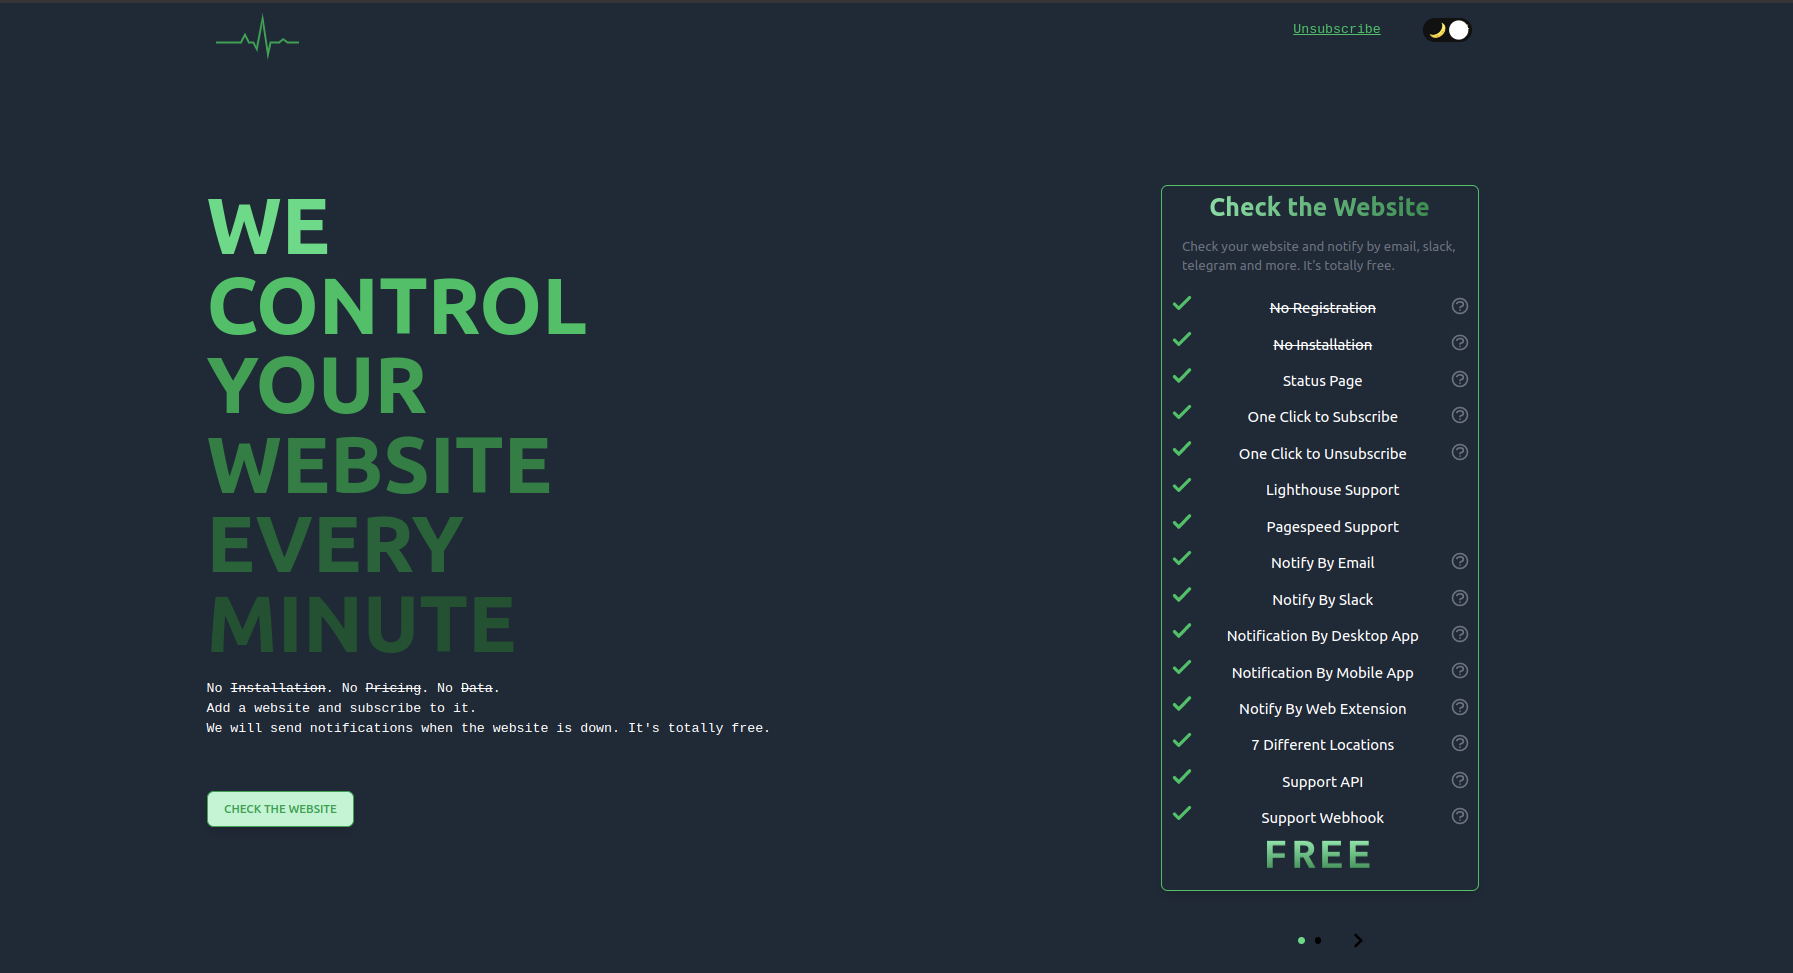 checkthe.website Landing page